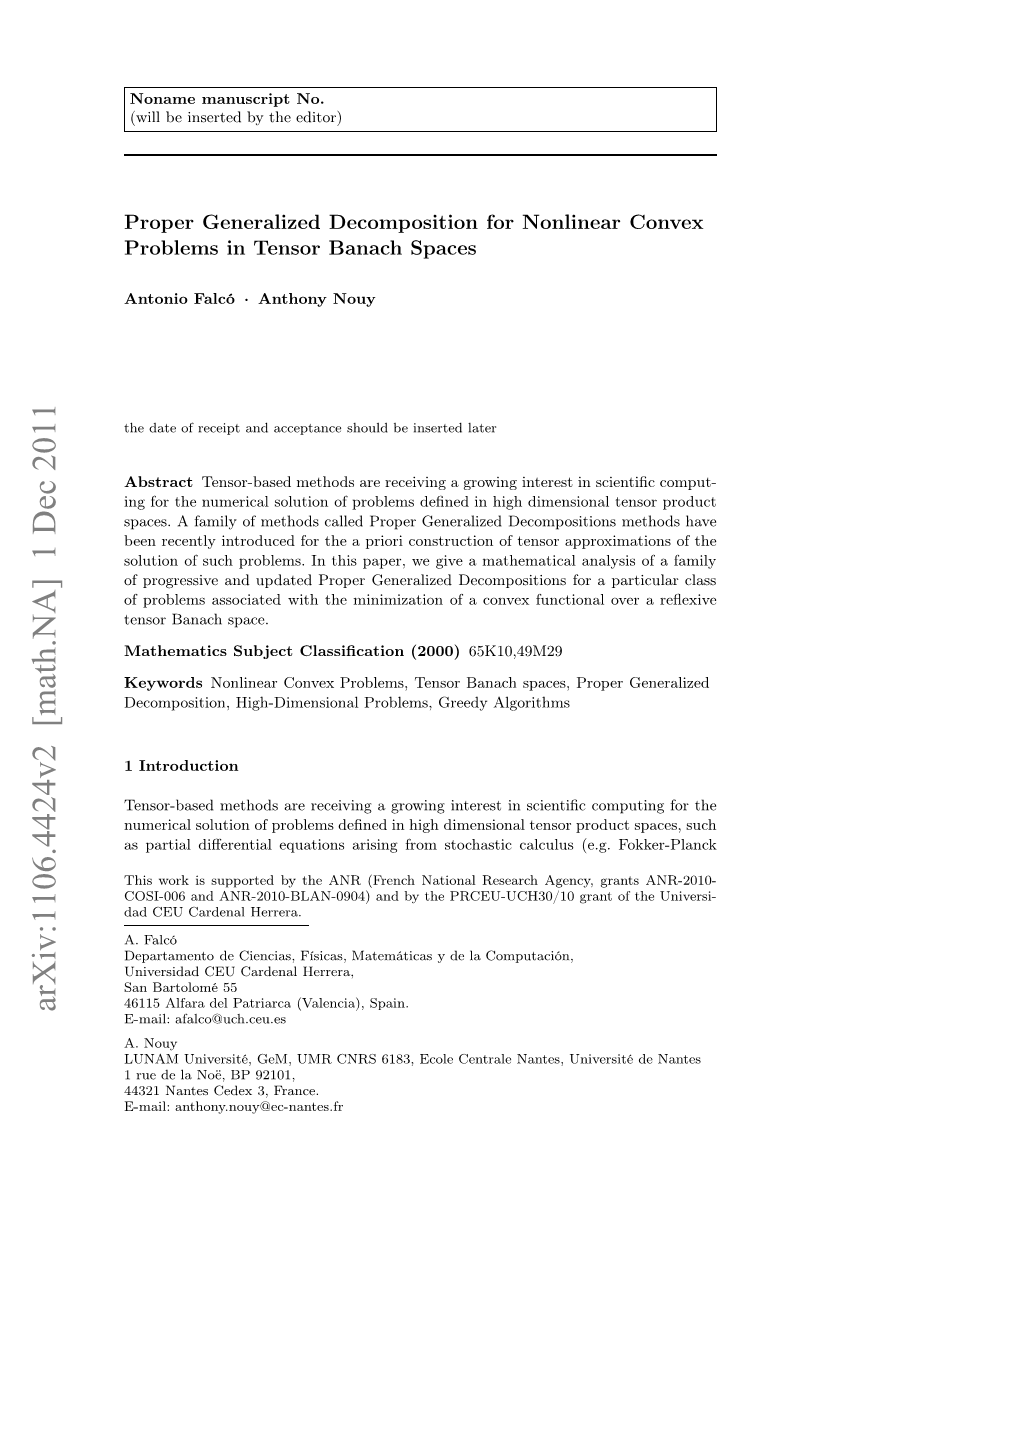 Proper Generalized Decomposition for Nonlinear Convex Problems In